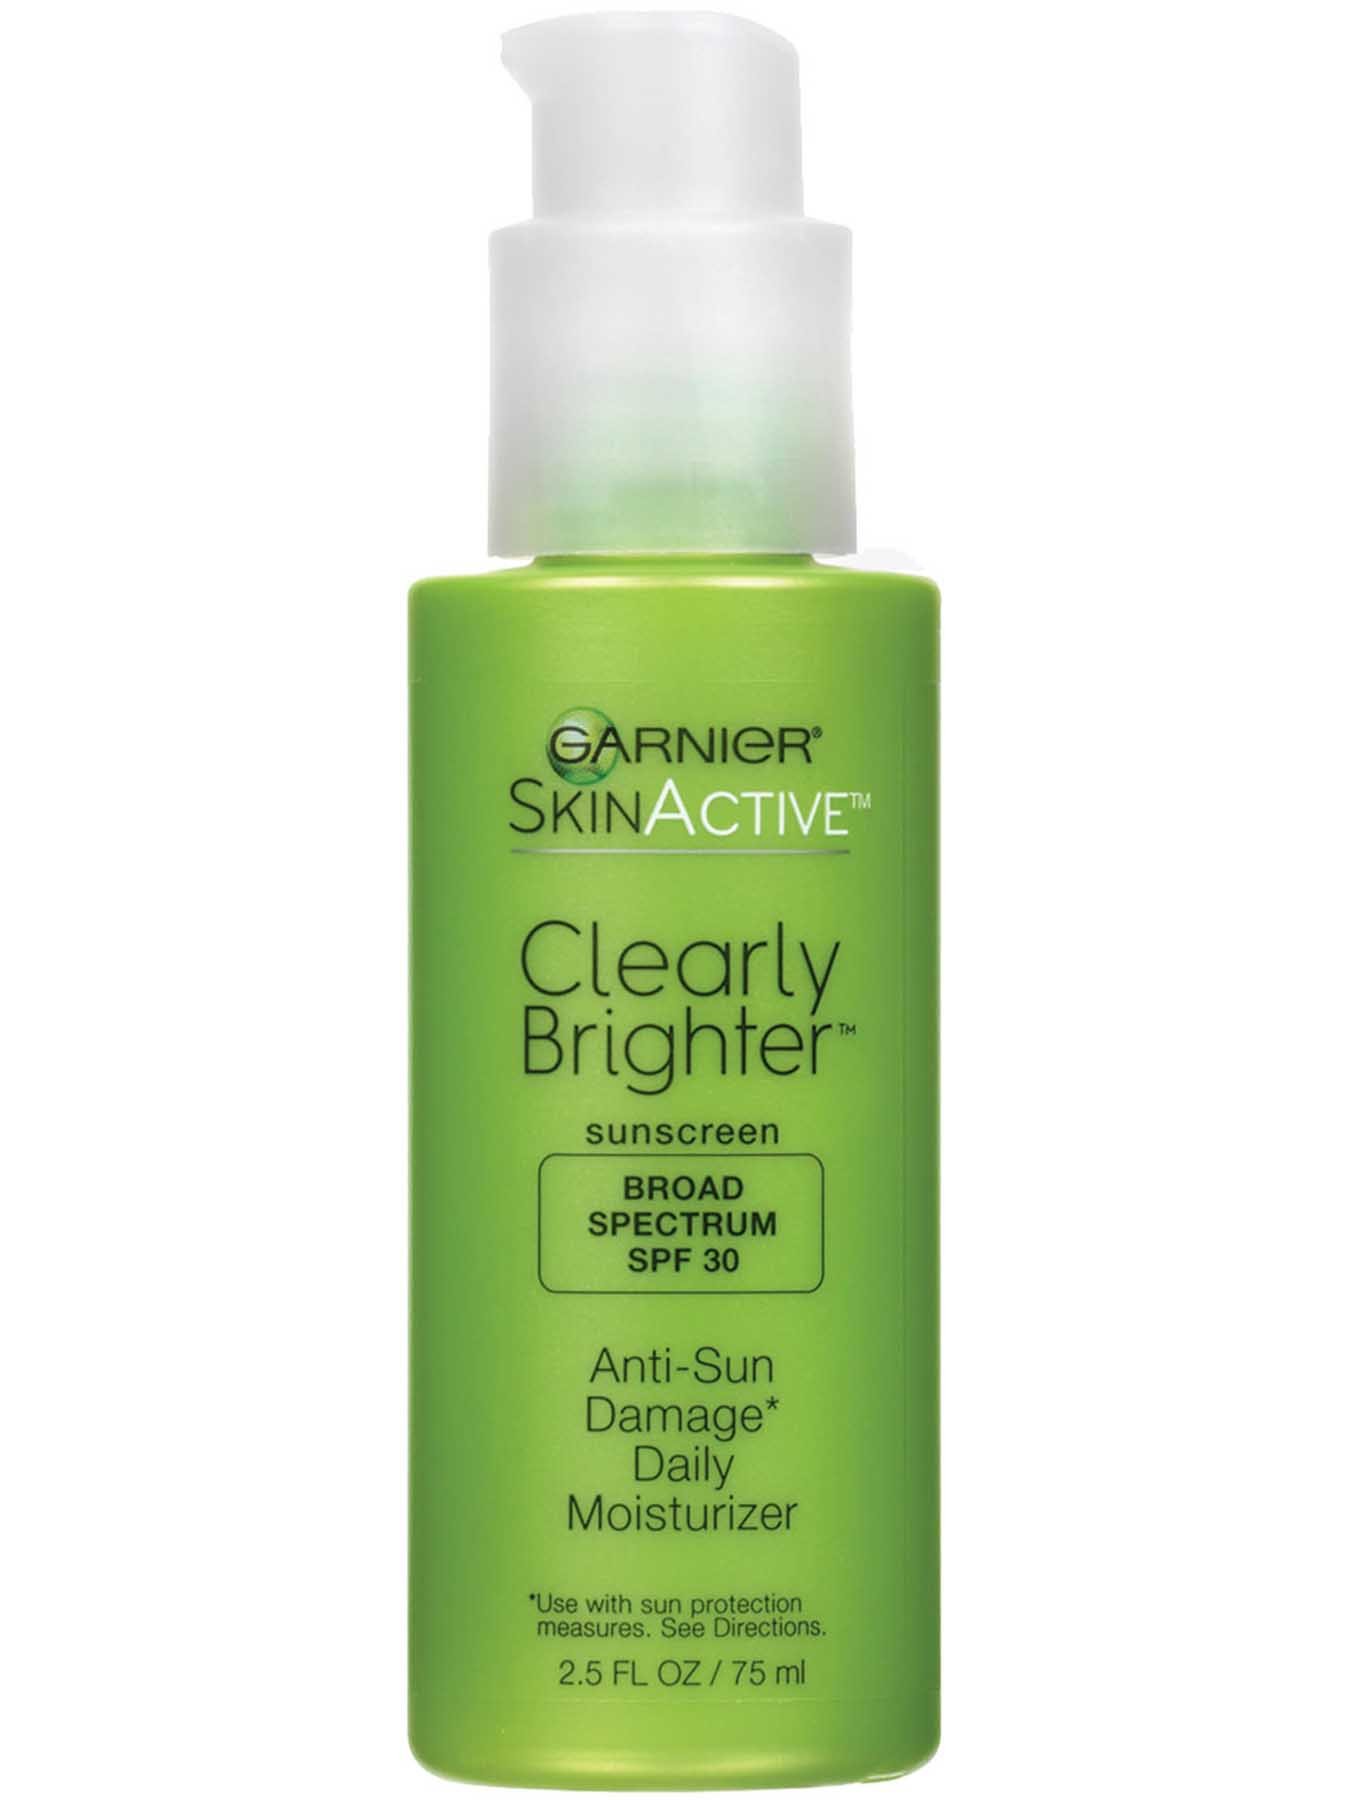 Every Skin Garnier Care | Type Products for Skin